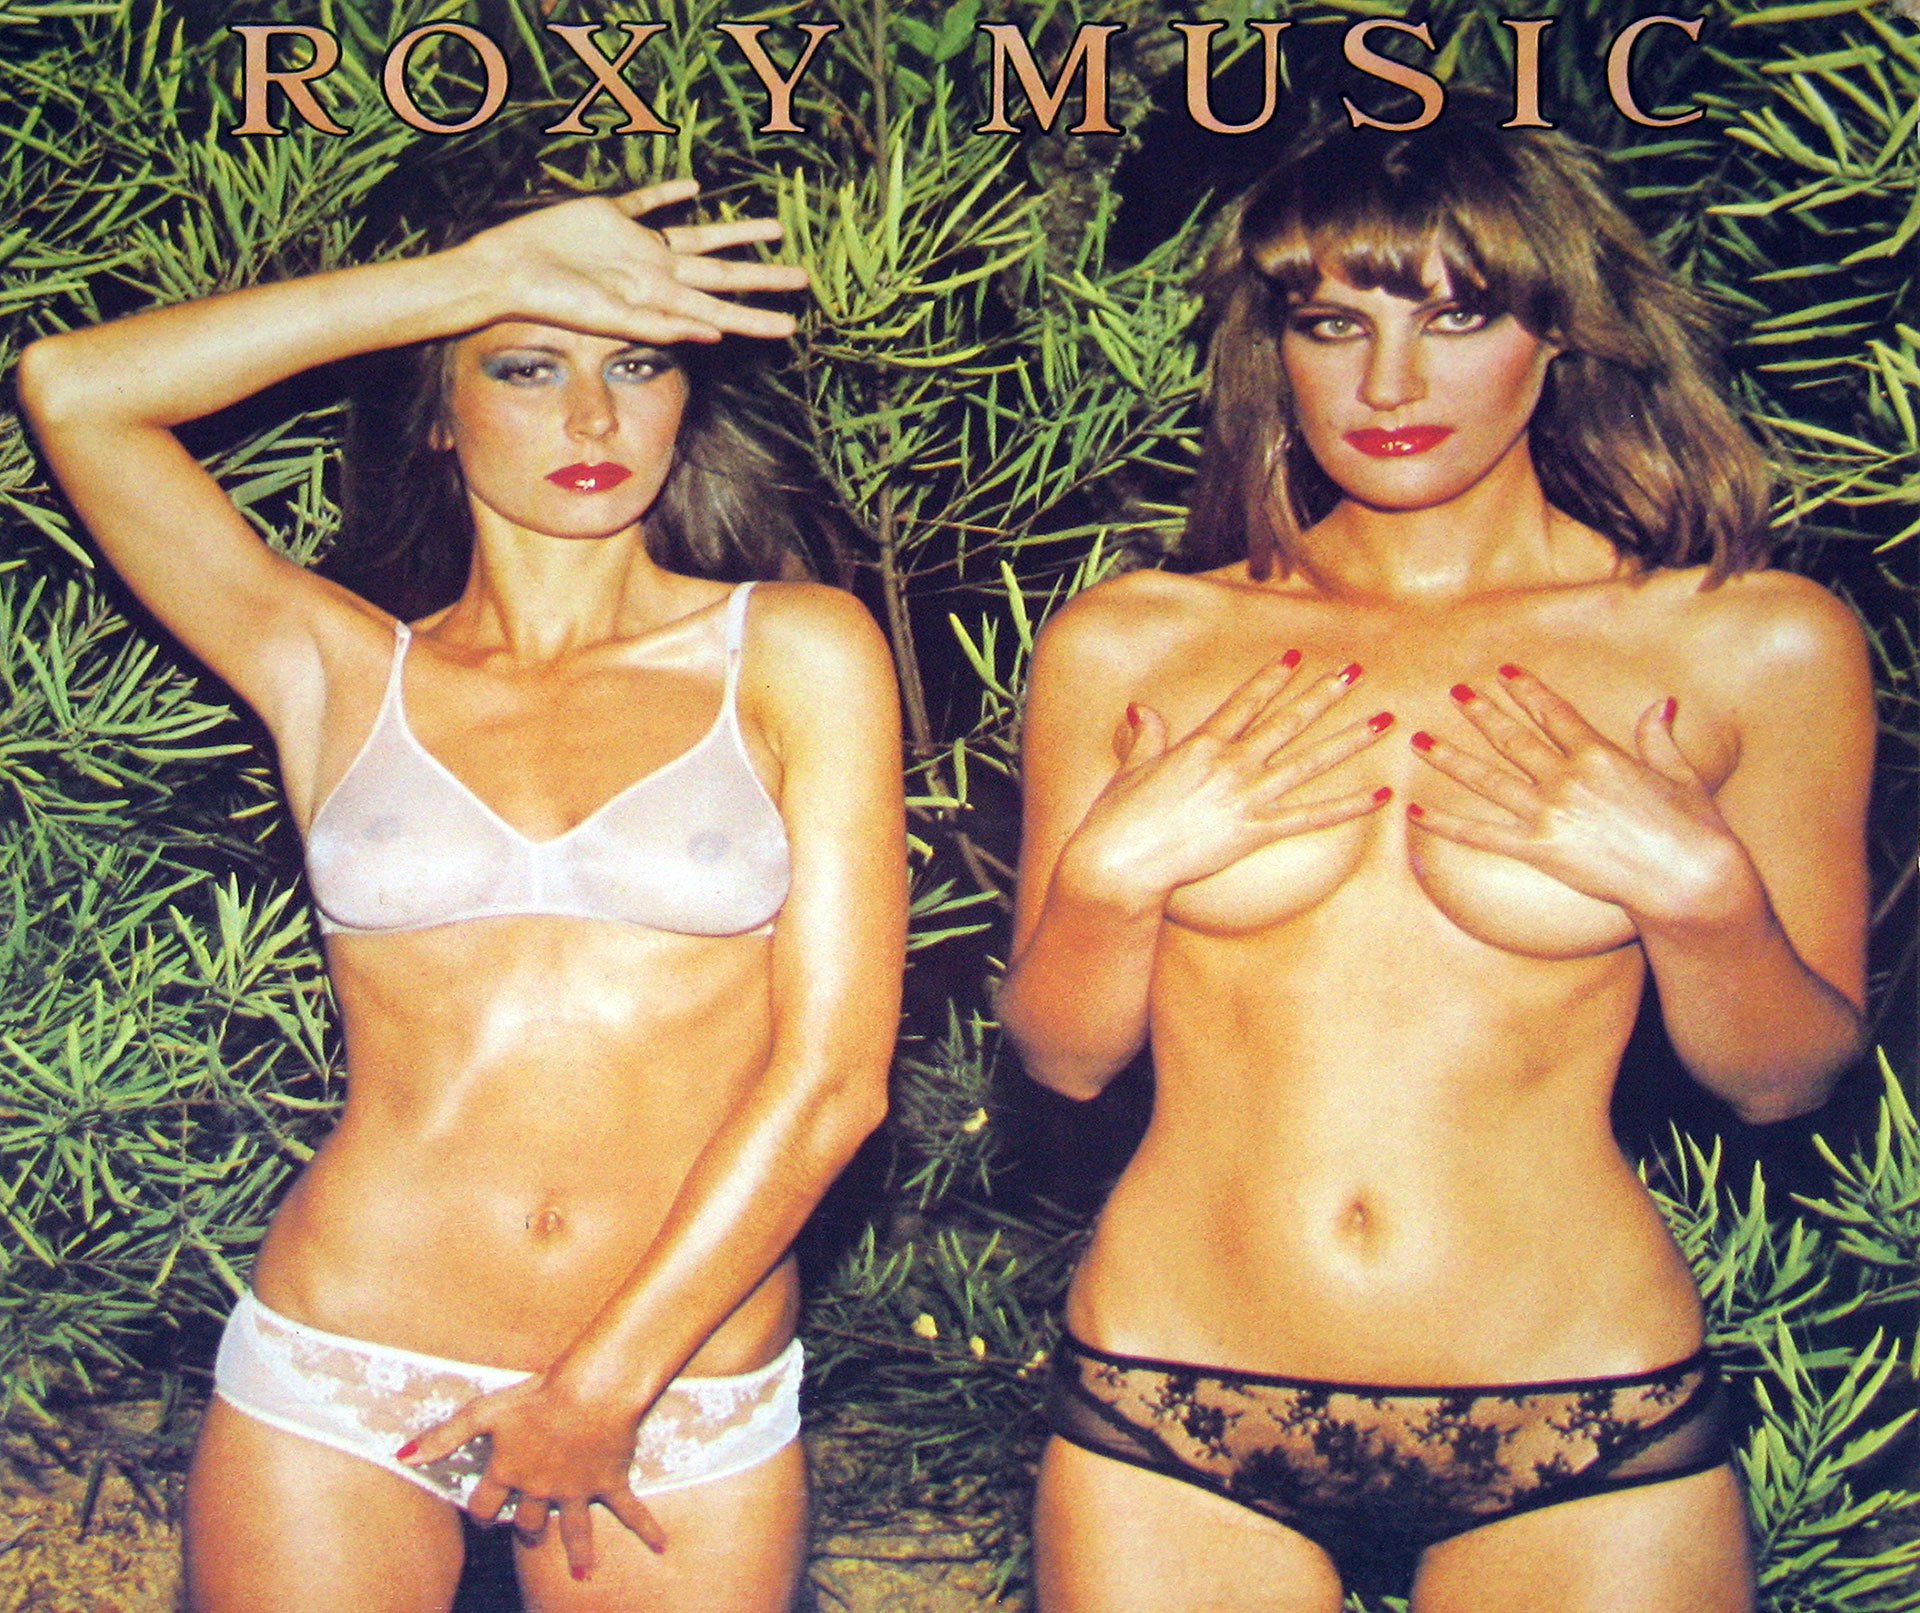 large photo of the album front cover of: ROXY MUSIC - Country Life "The 4th Roxy Music Album" - 12" Vinyl LP 